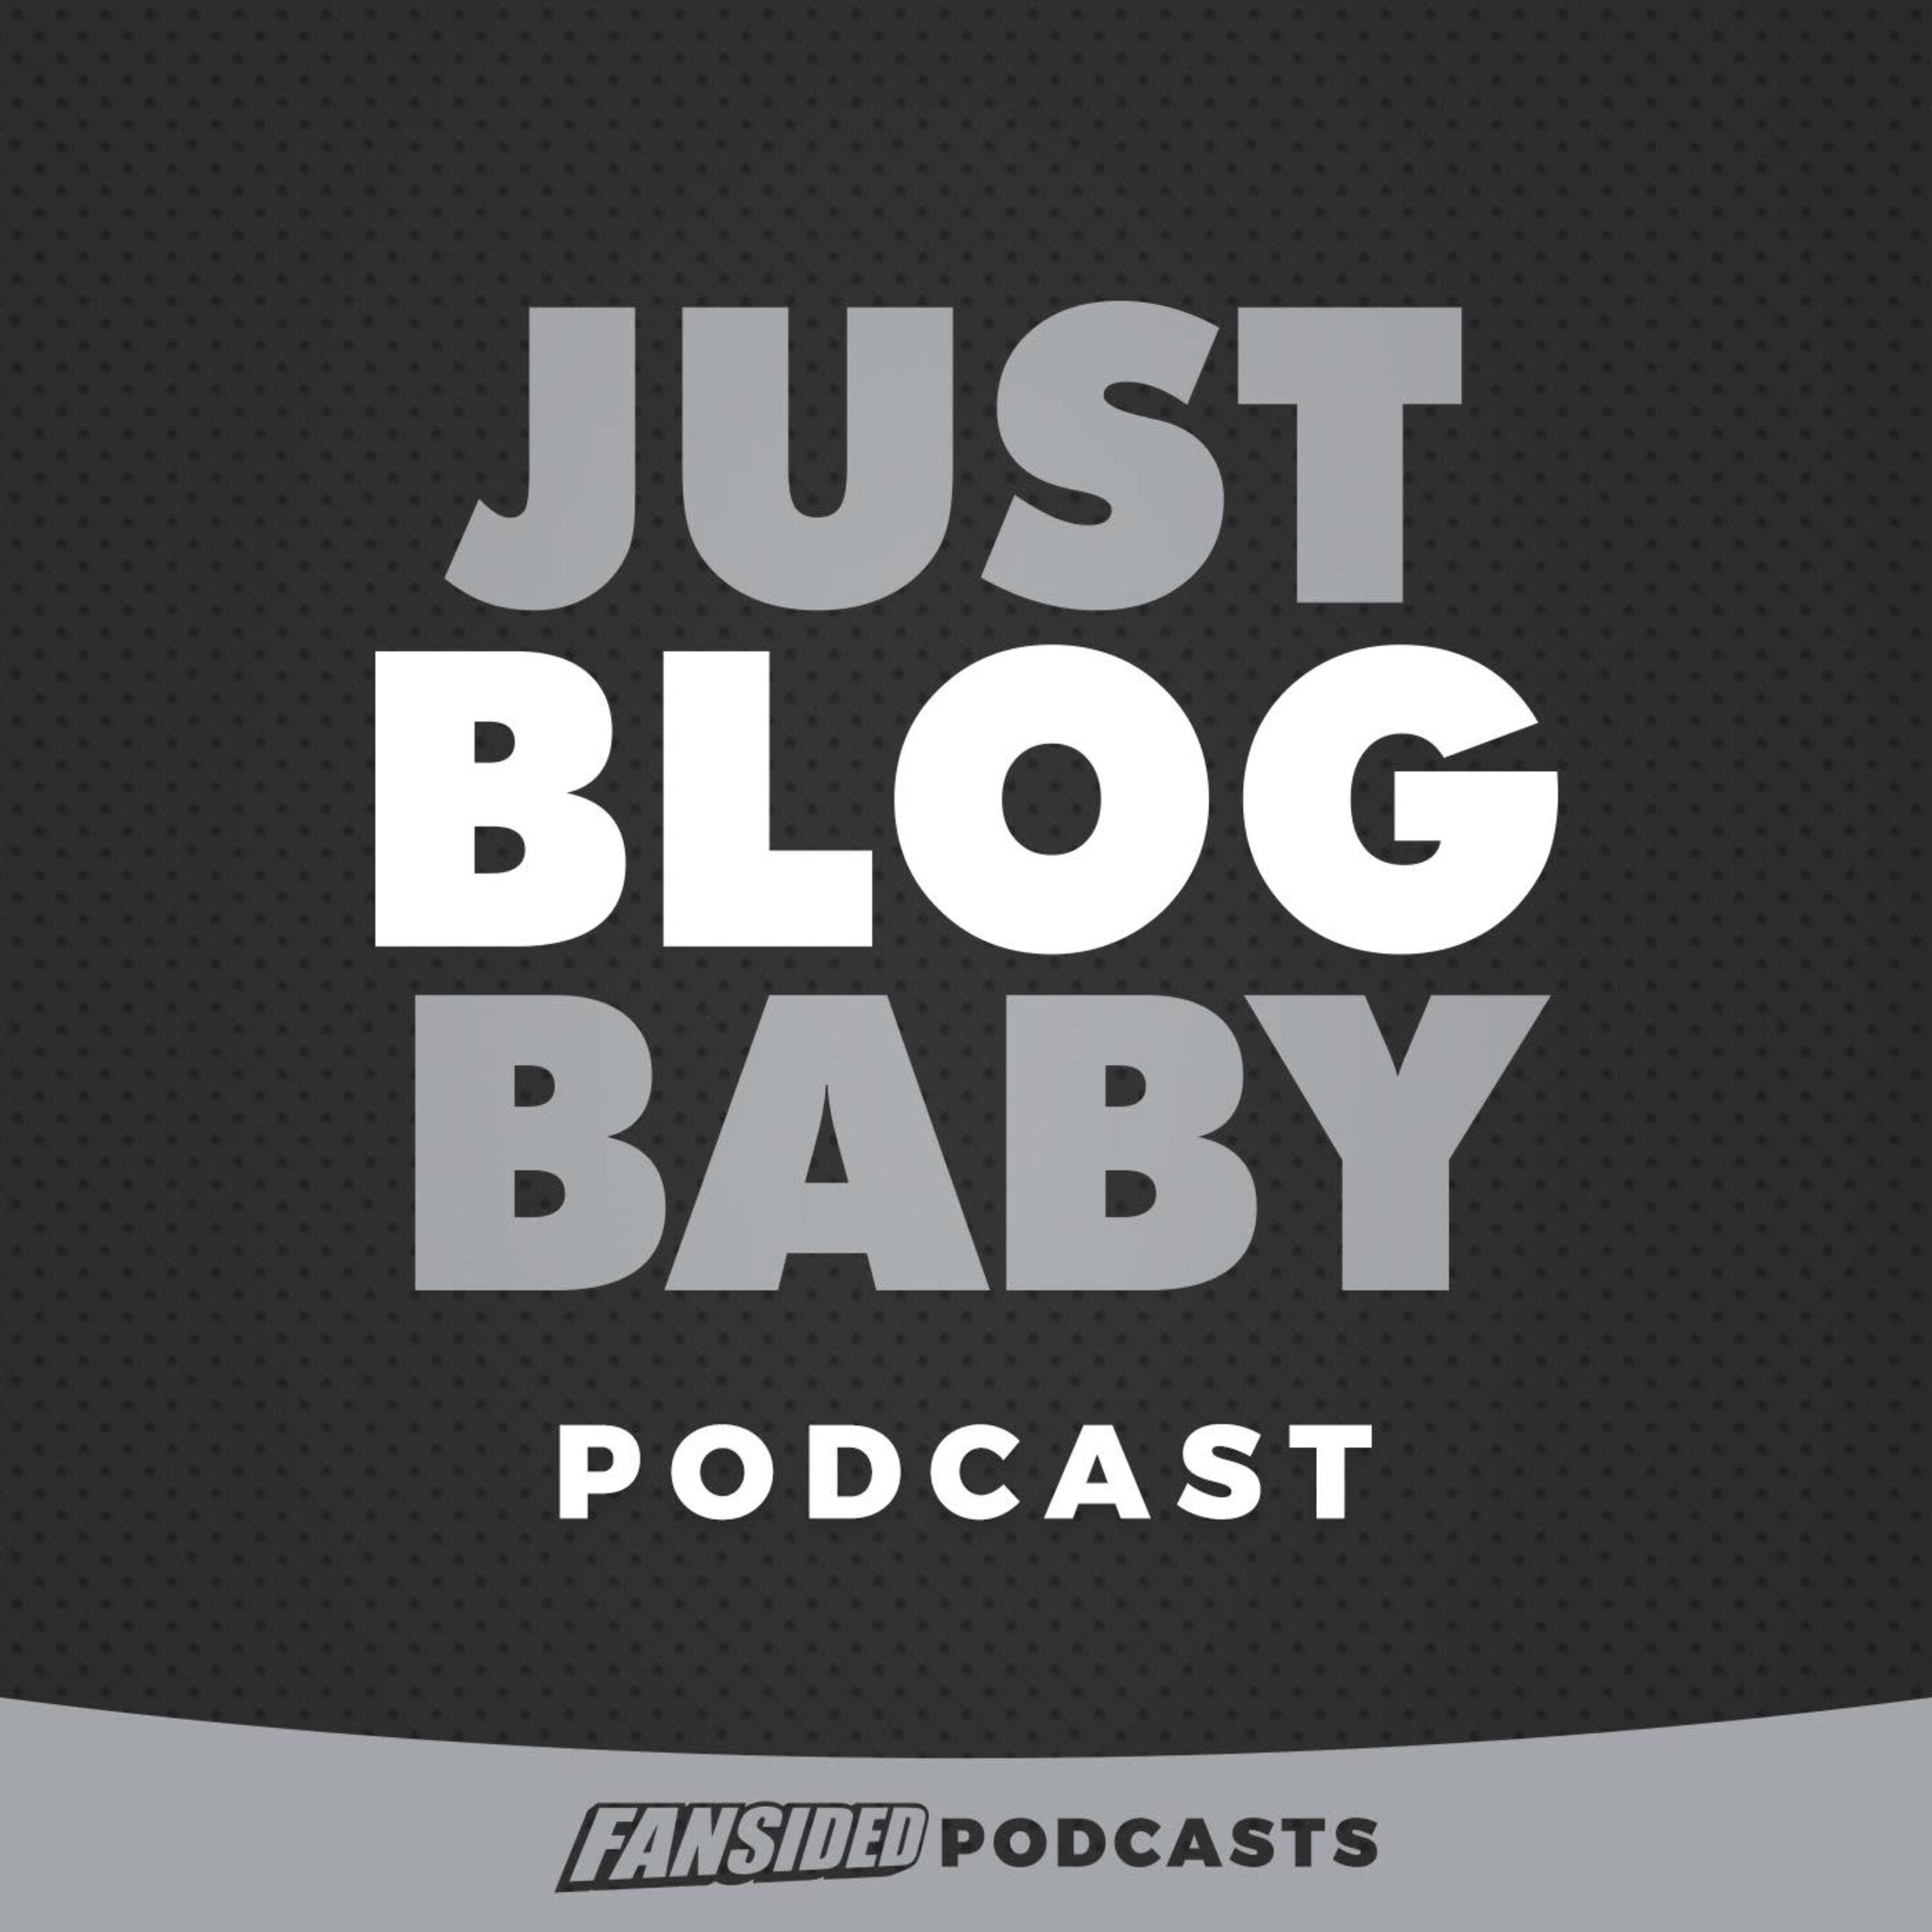 Just Blog Baby Podcast on the Oakland Raiders